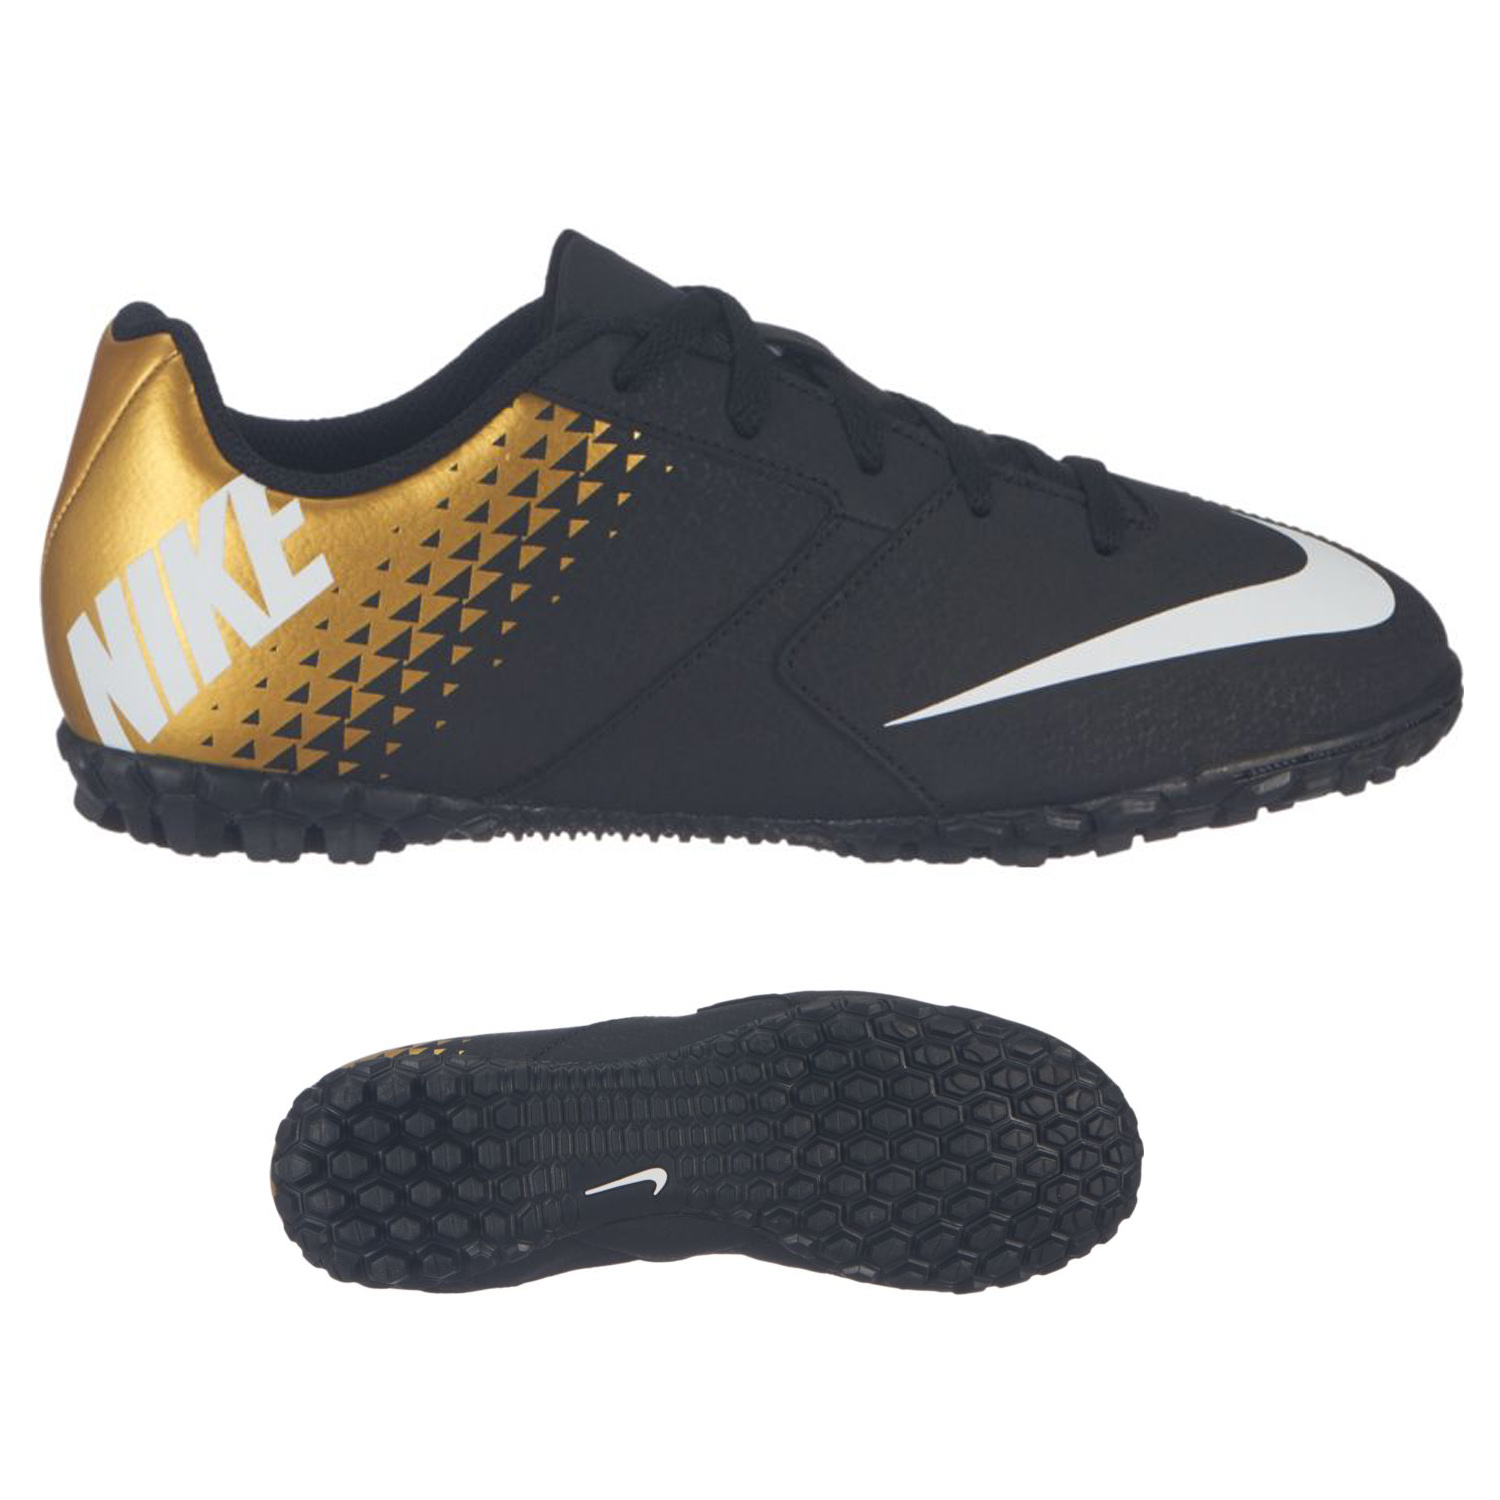 Nike Youth Bomba Turf Soccer Shoes (Black/Gold) @ SoccerEvolution